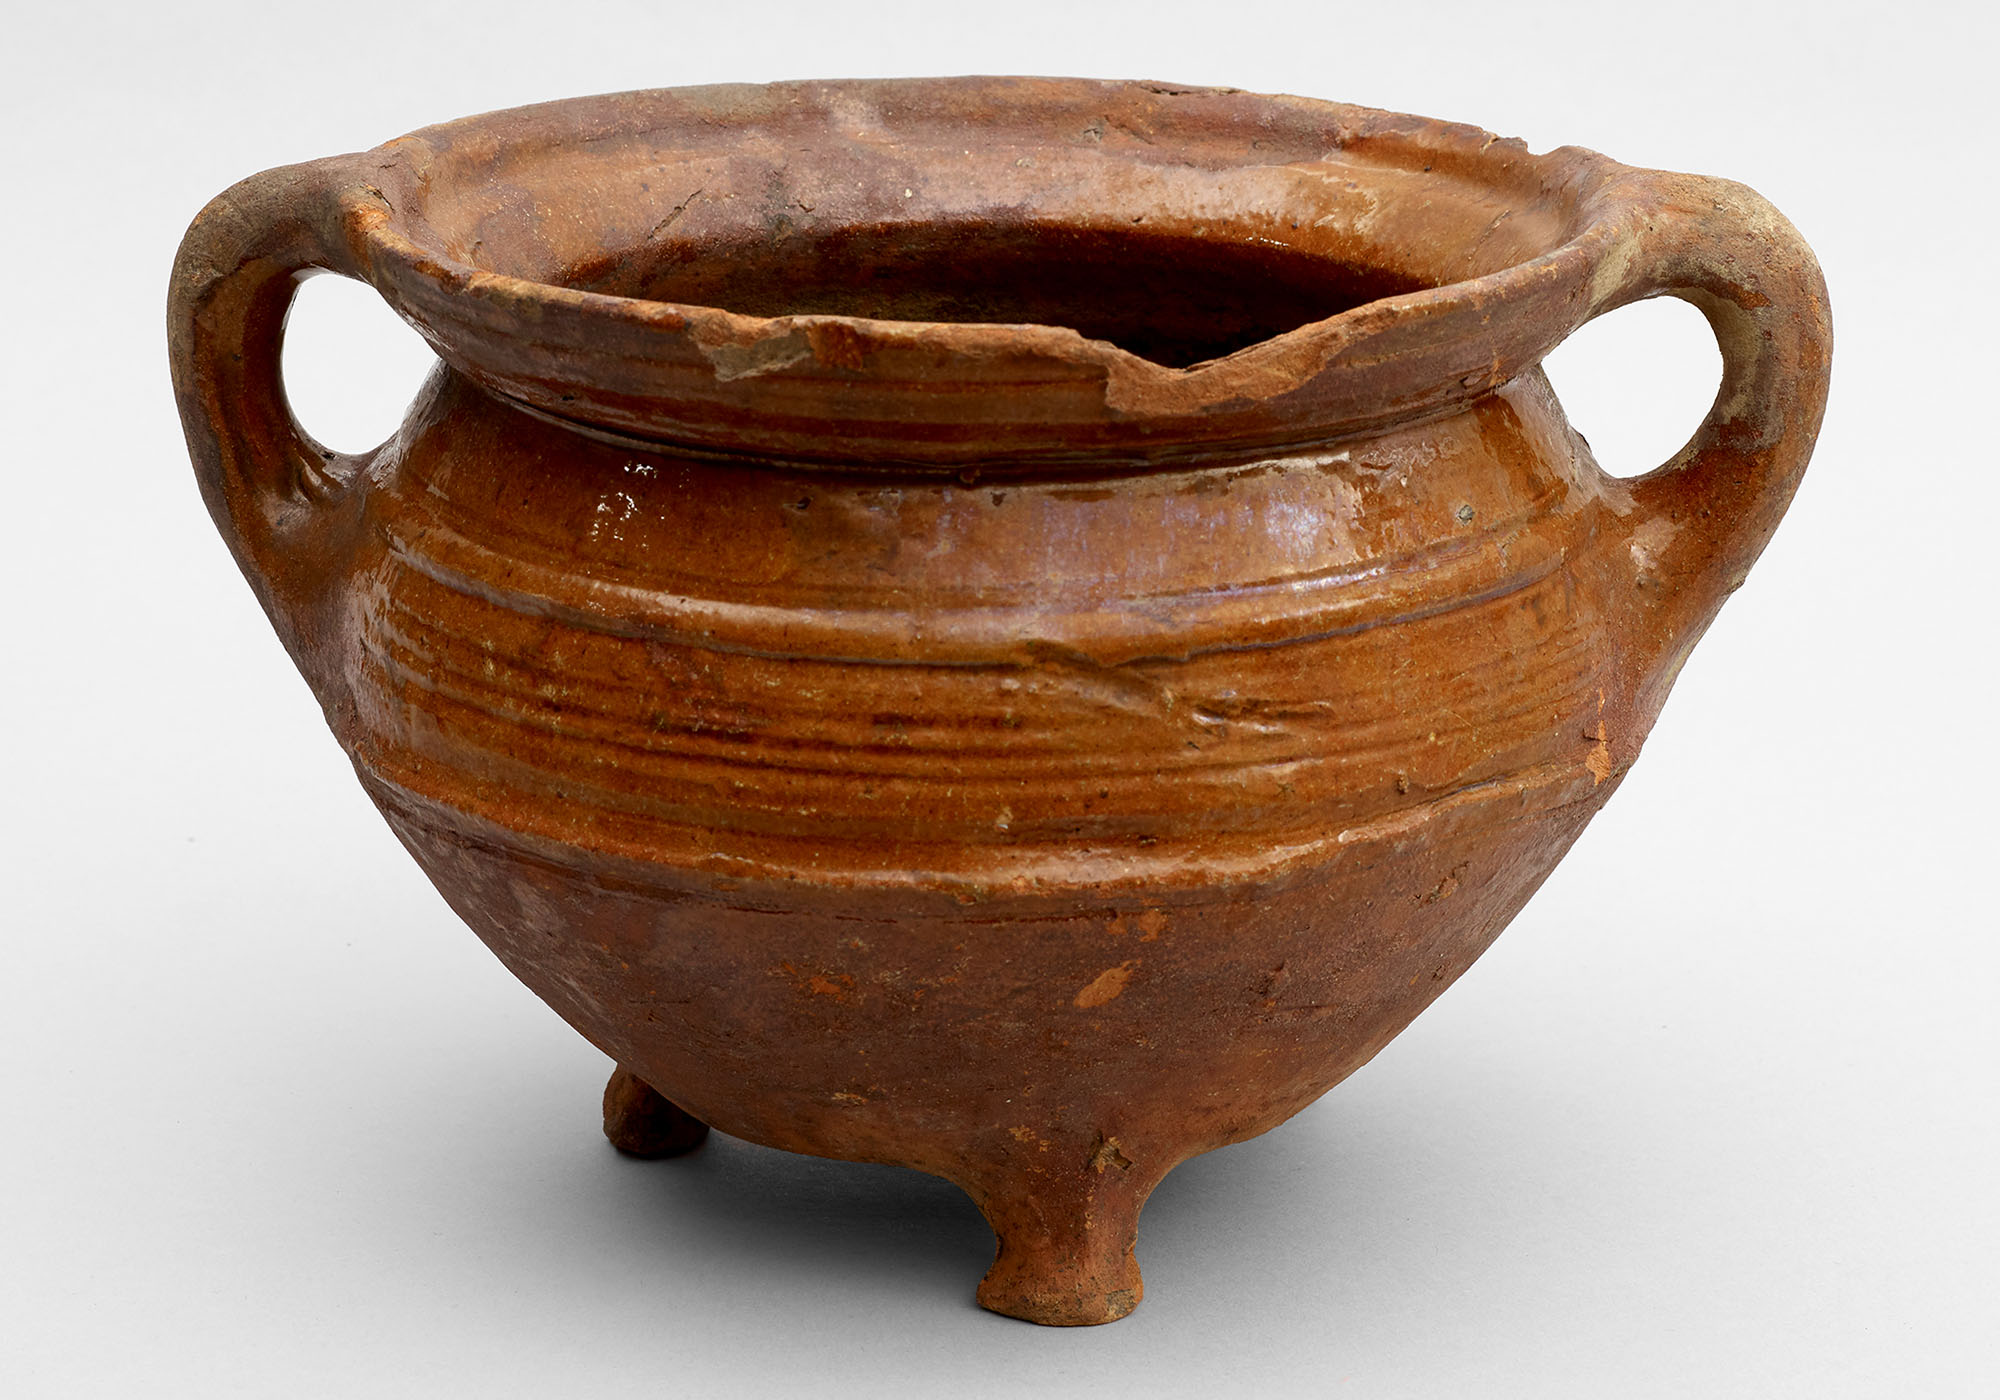 Medieval cooking pot (London, England) Gallery Image